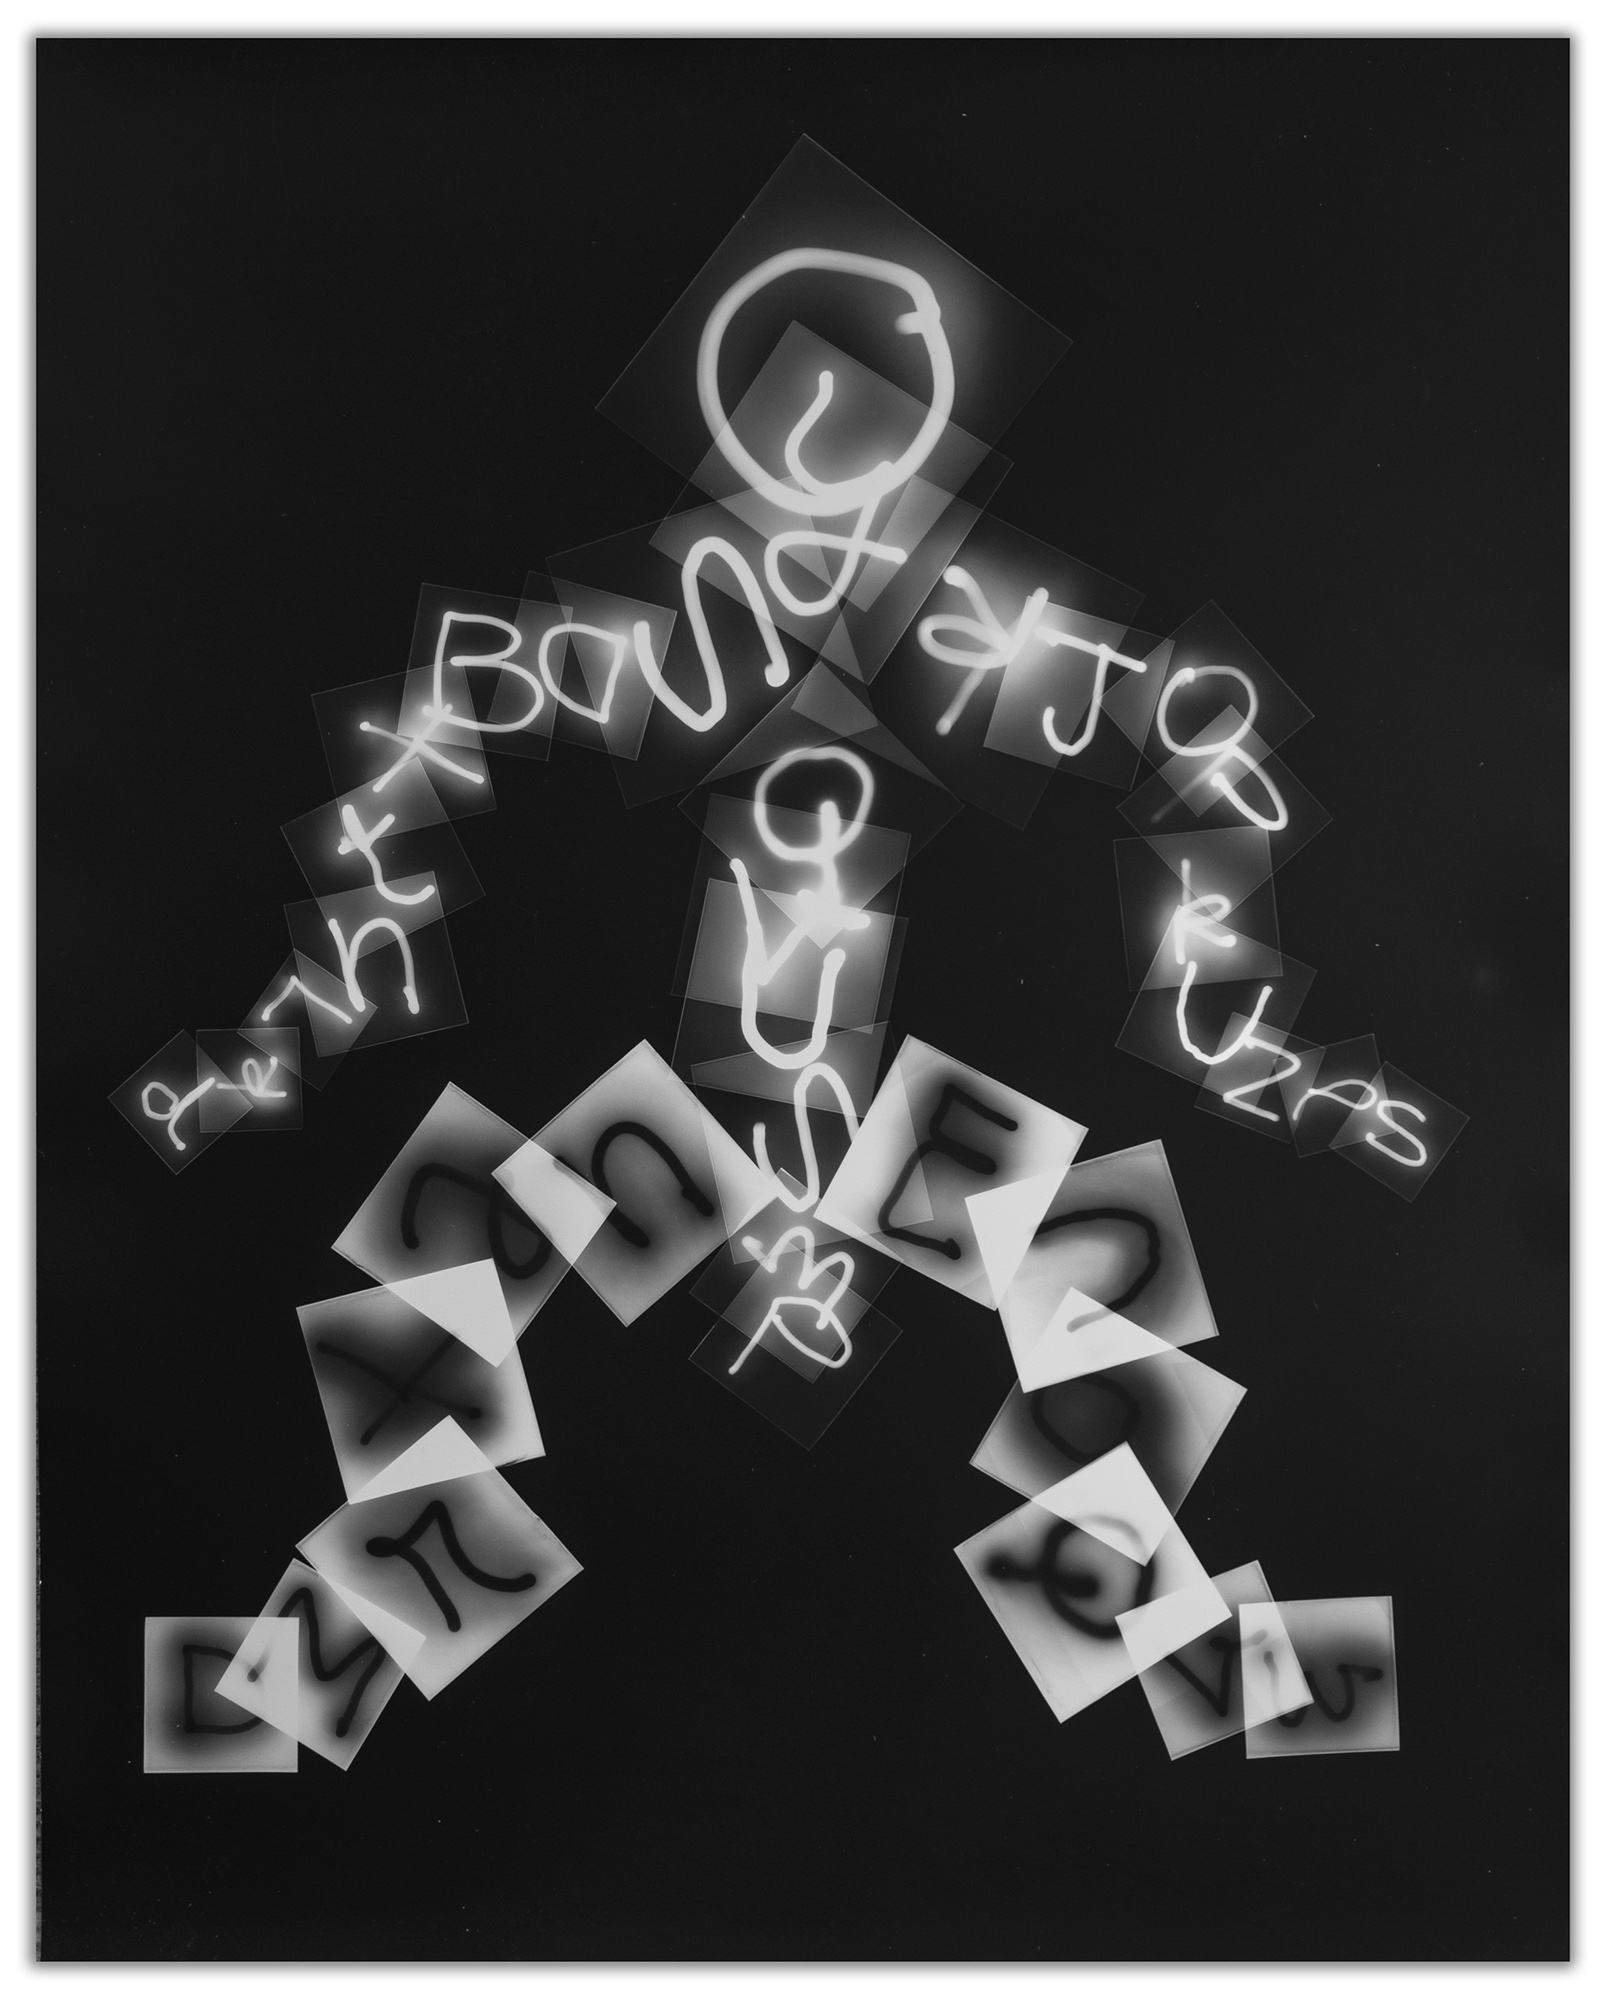 photogram with letters overlaying each other in black and white forming a human figure